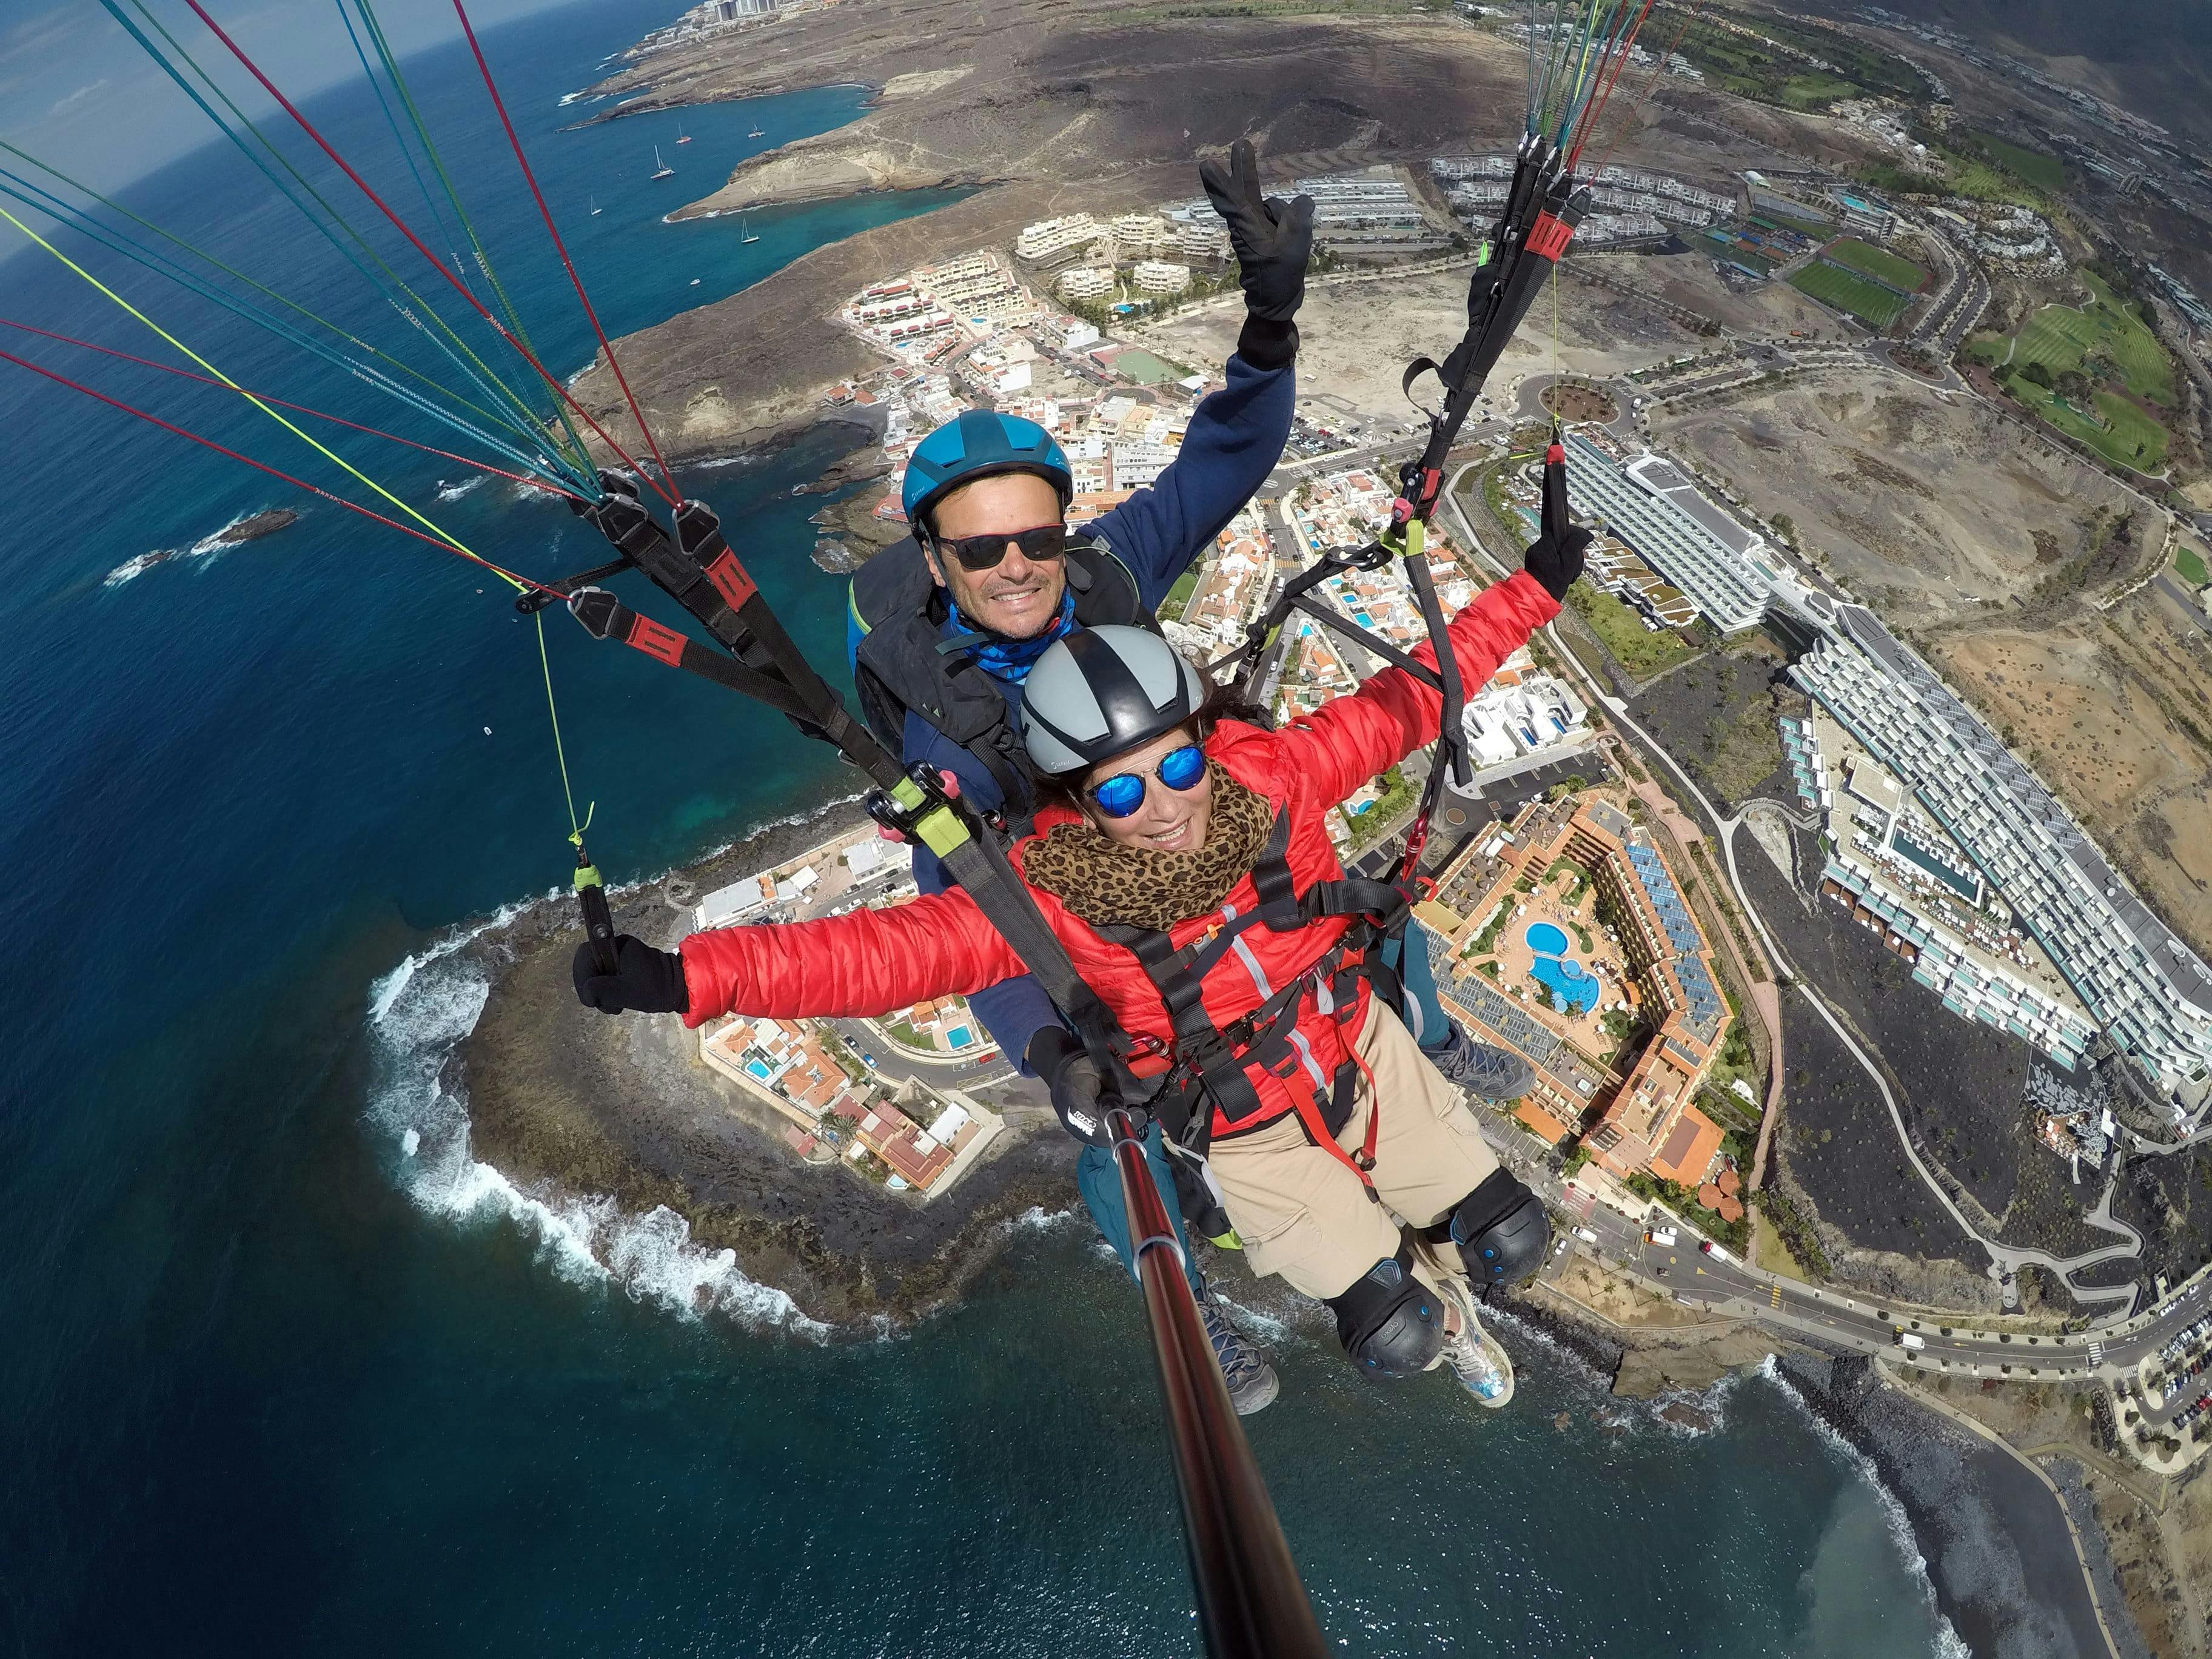 Paragliding Experiences in Tenerife